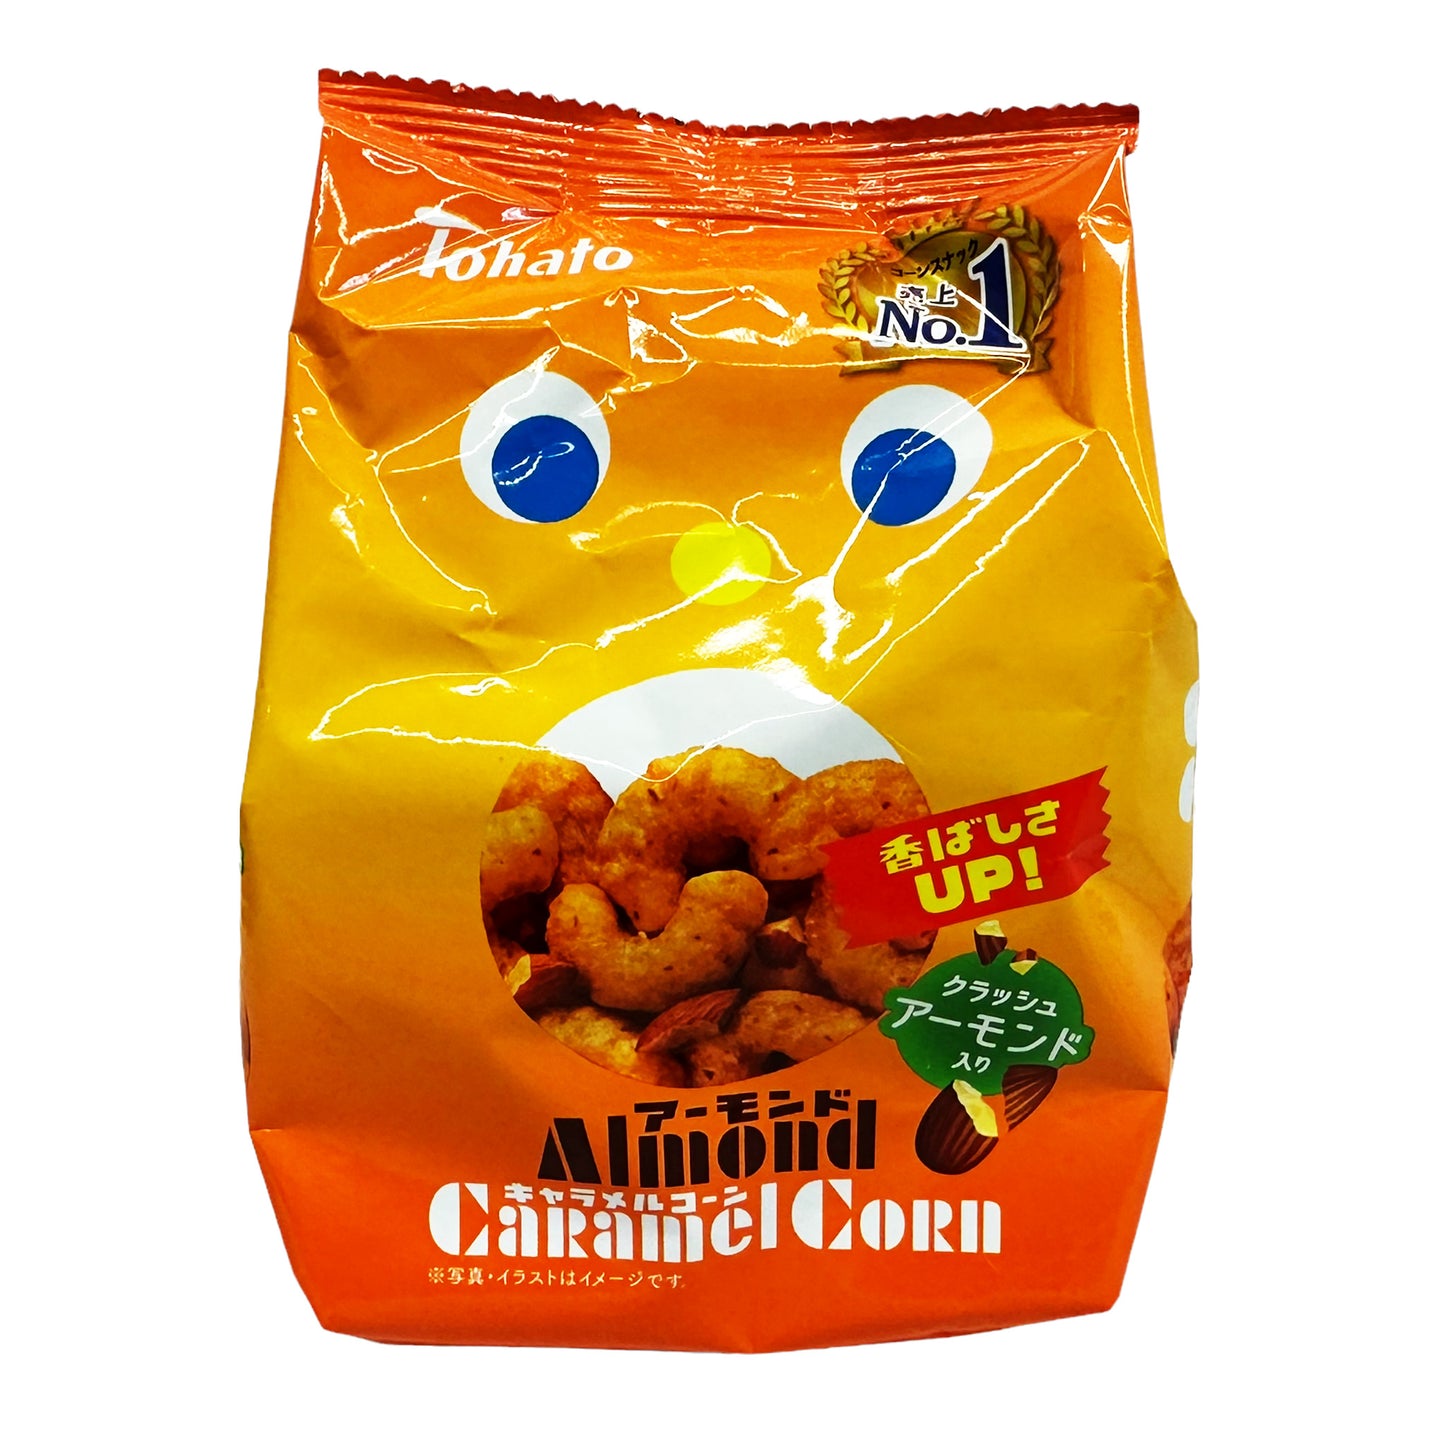 Front graphic image of Tohato Caramel Corn - Almond 2.46oz (70g)